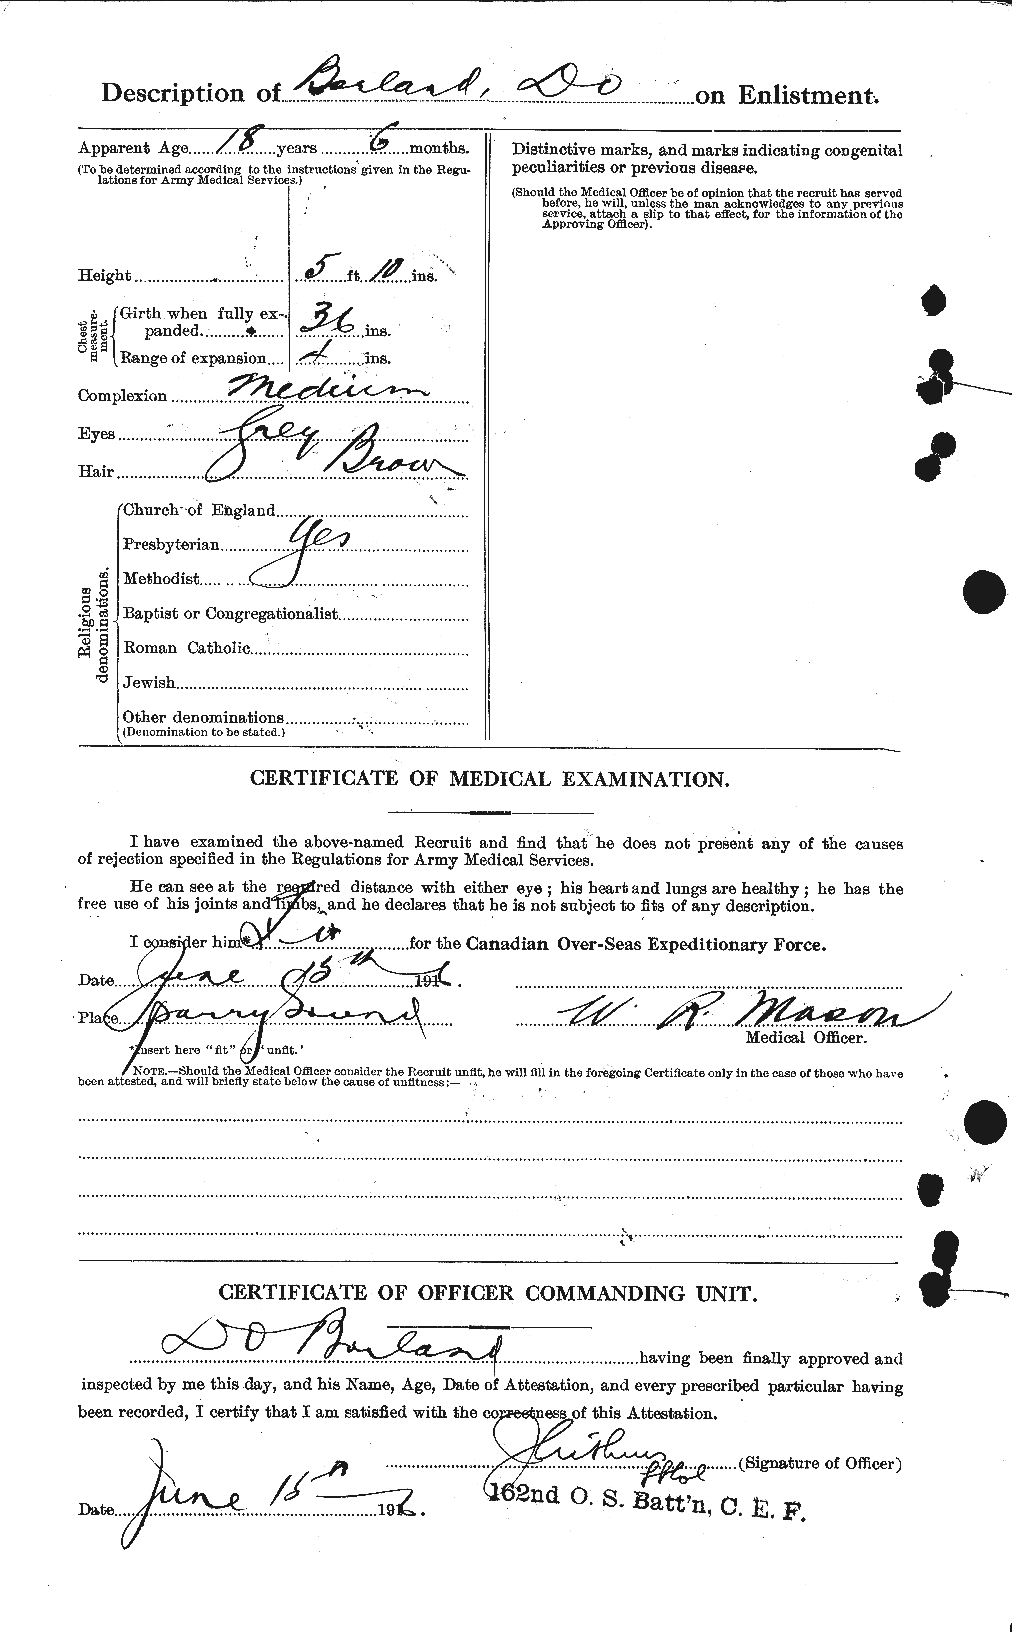 Personnel Records of the First World War - CEF 252430b